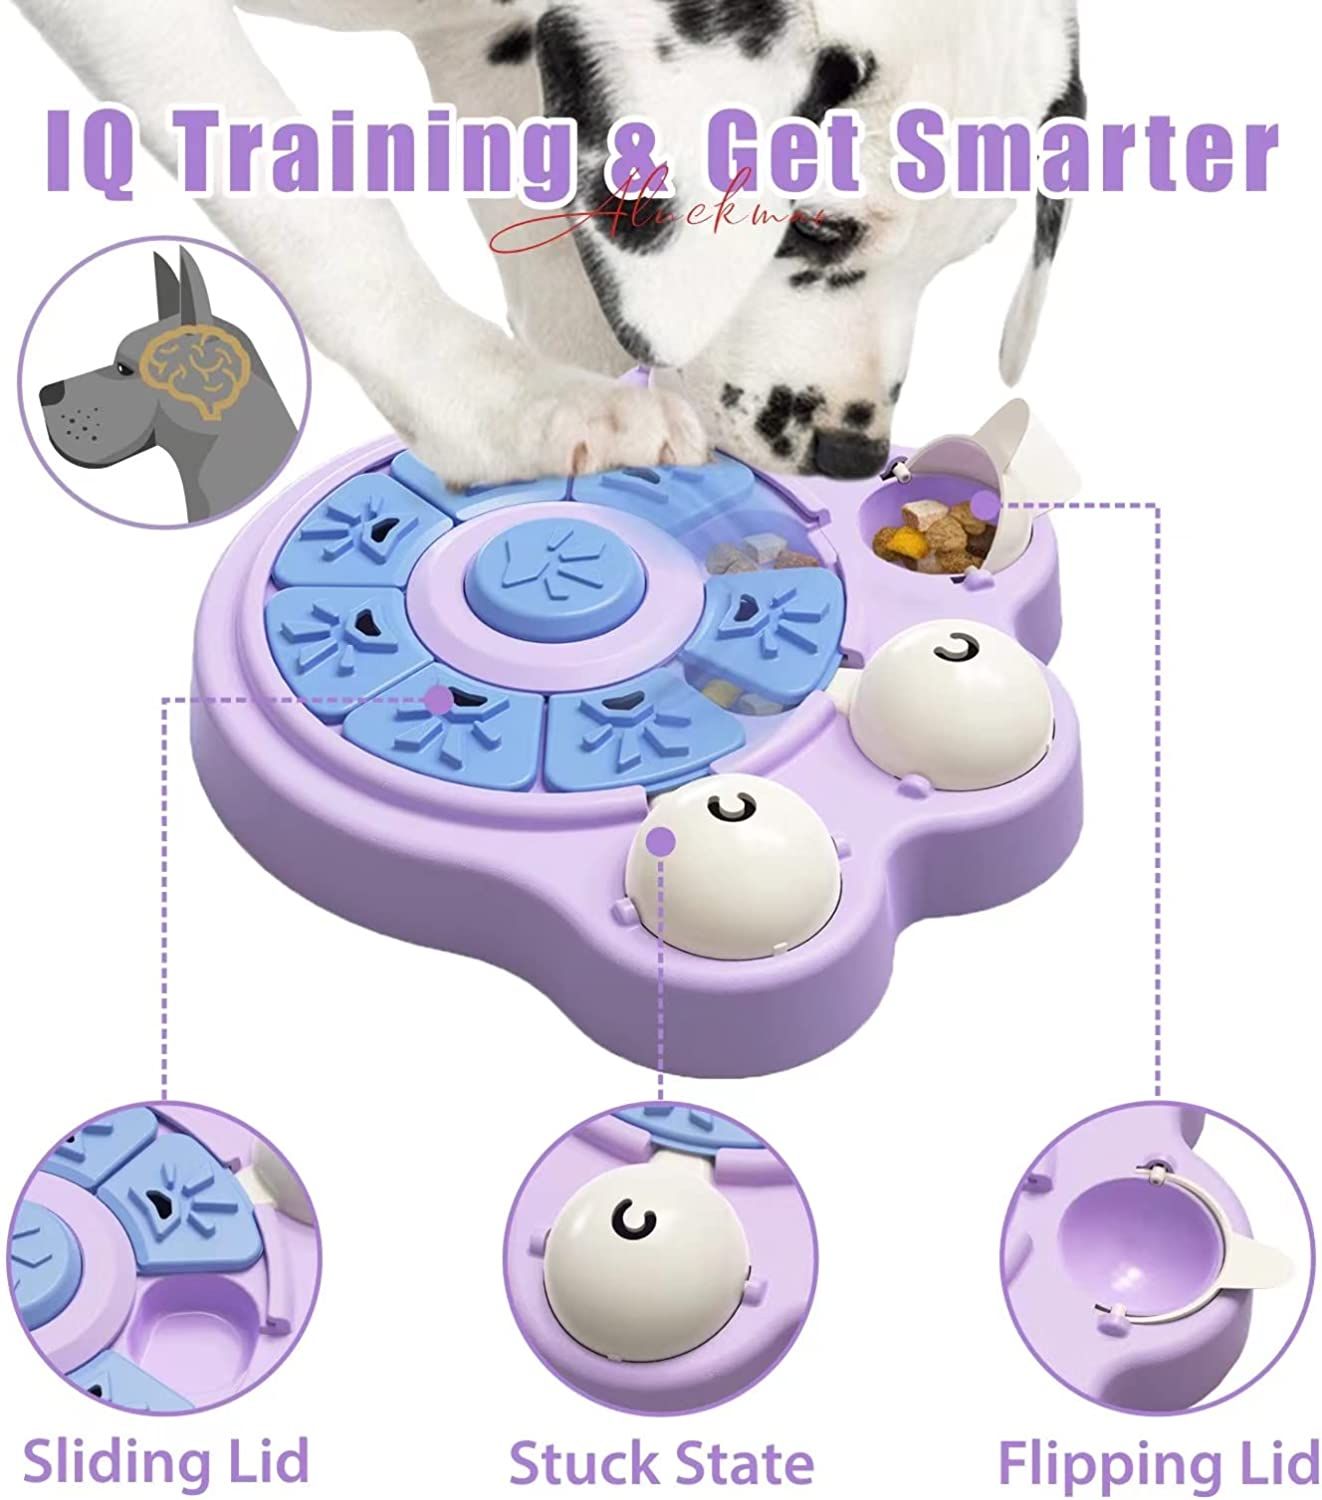 Aluckmao Interactive Dog Puzzle Toys, Puzzle Games for Dogs Mental  Stimulation, Dog Enrichment Toys Treat Dispenser